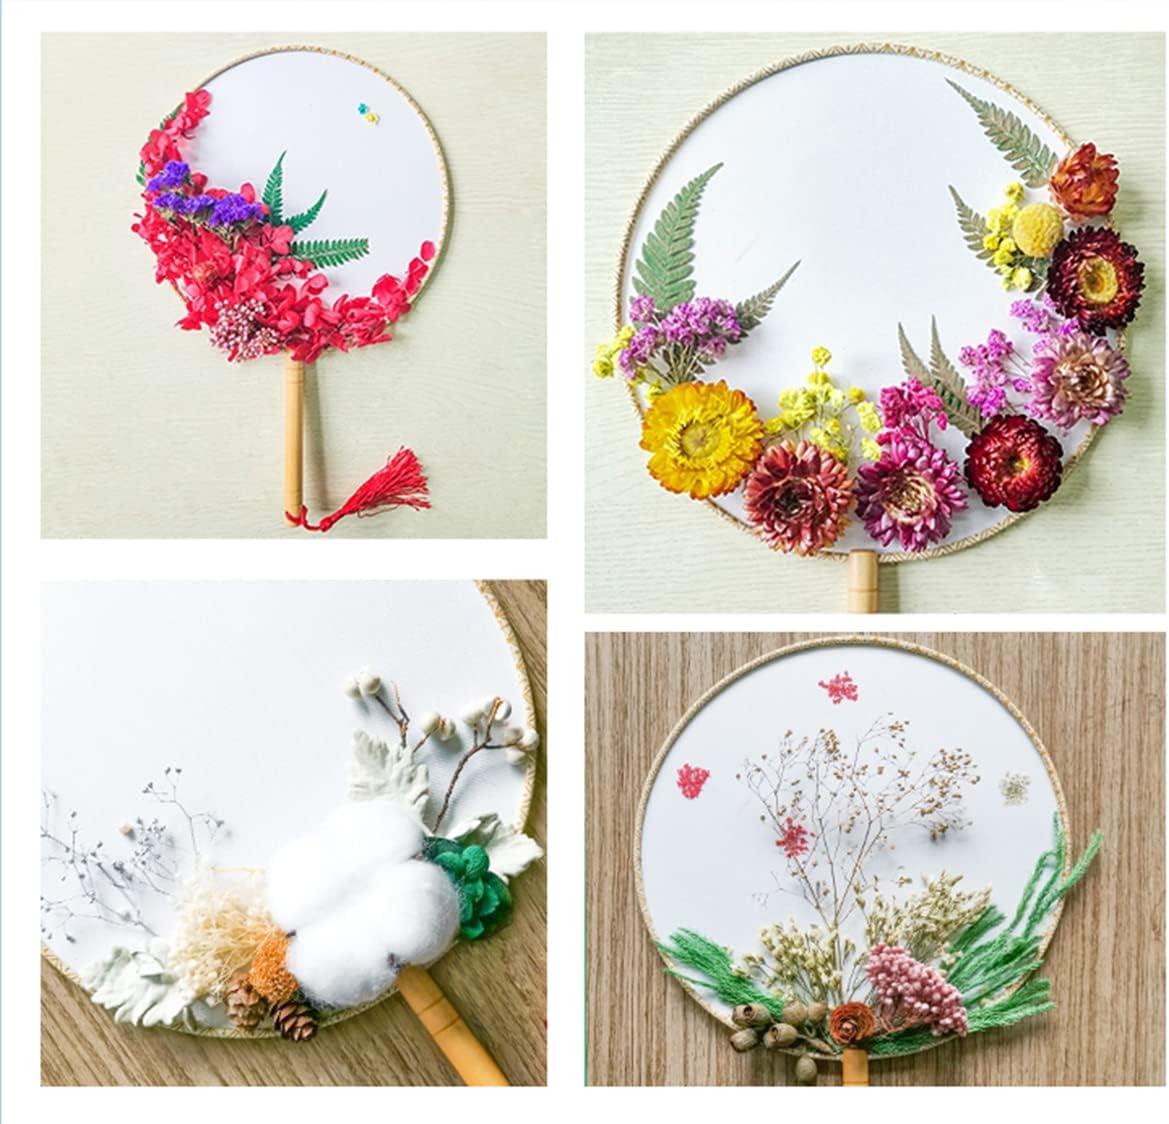 Dried Flowers for Resin Art and Craft - DIY Resin Flower Art